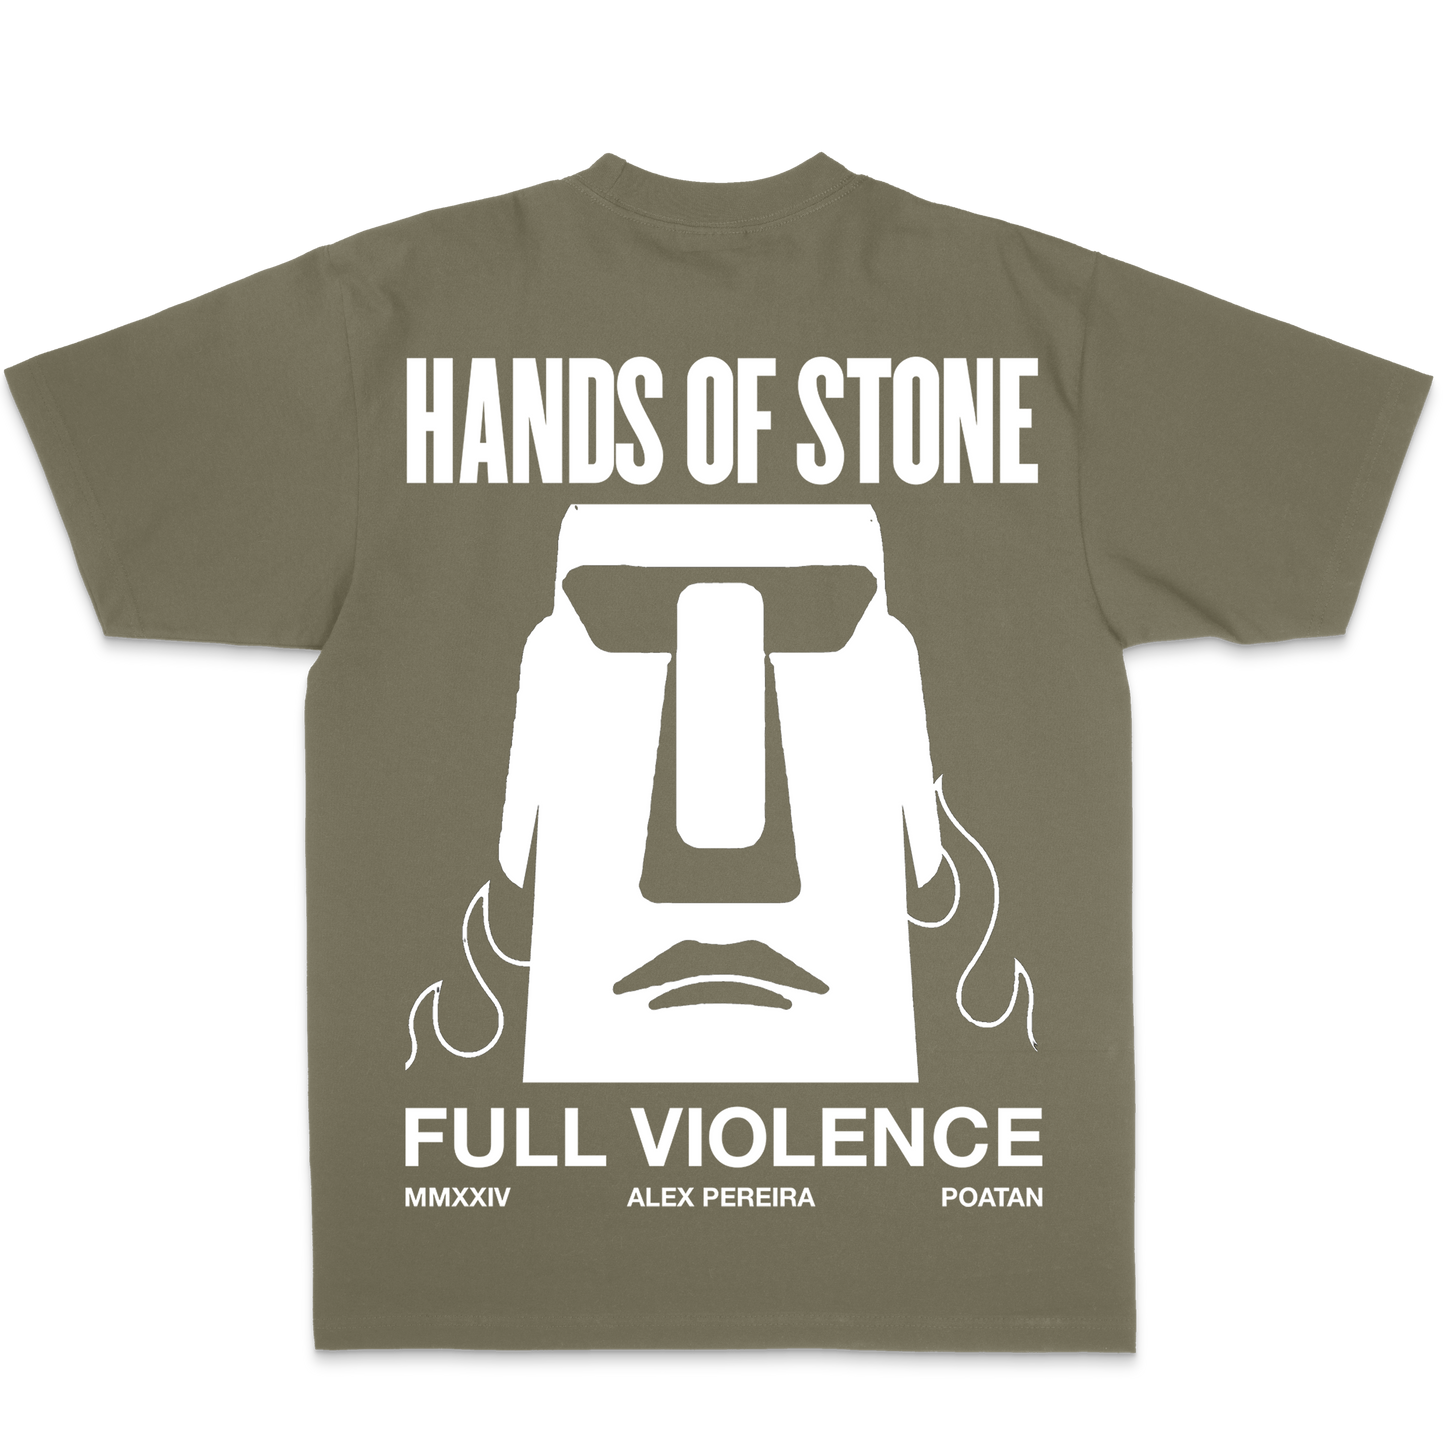 Hands of Stone "Classic" Tee in Olive